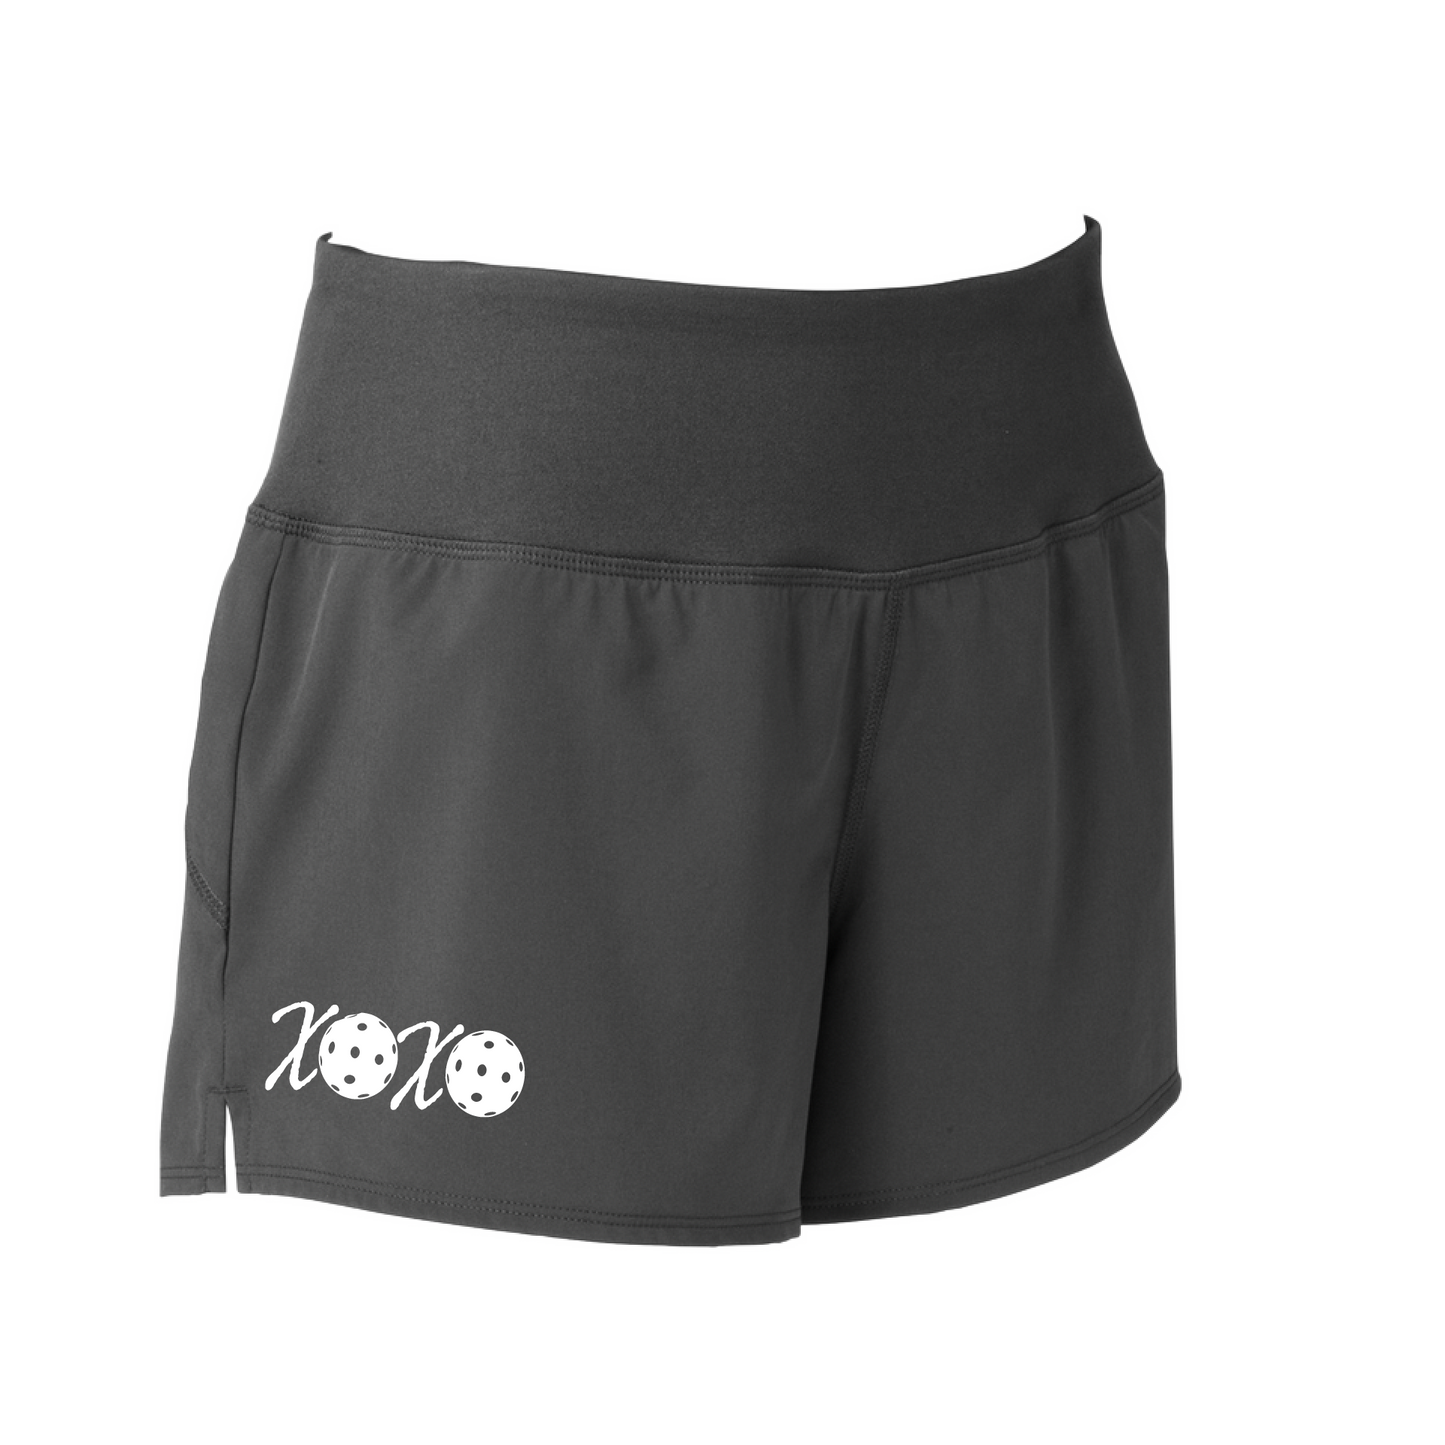 Pickleball Shorts Designs: XOXO  Sport Tek women’s repeat shorts come with built-in cell phone pocket on the exterior of the waistband. You can also feel secure knowing that no matter how strenuous the exercise, the shorts will remain in place (it won’t ride up!). These shorts are extremely versatile and trendy. Transition from the Pickleball court to running errands smoothly.